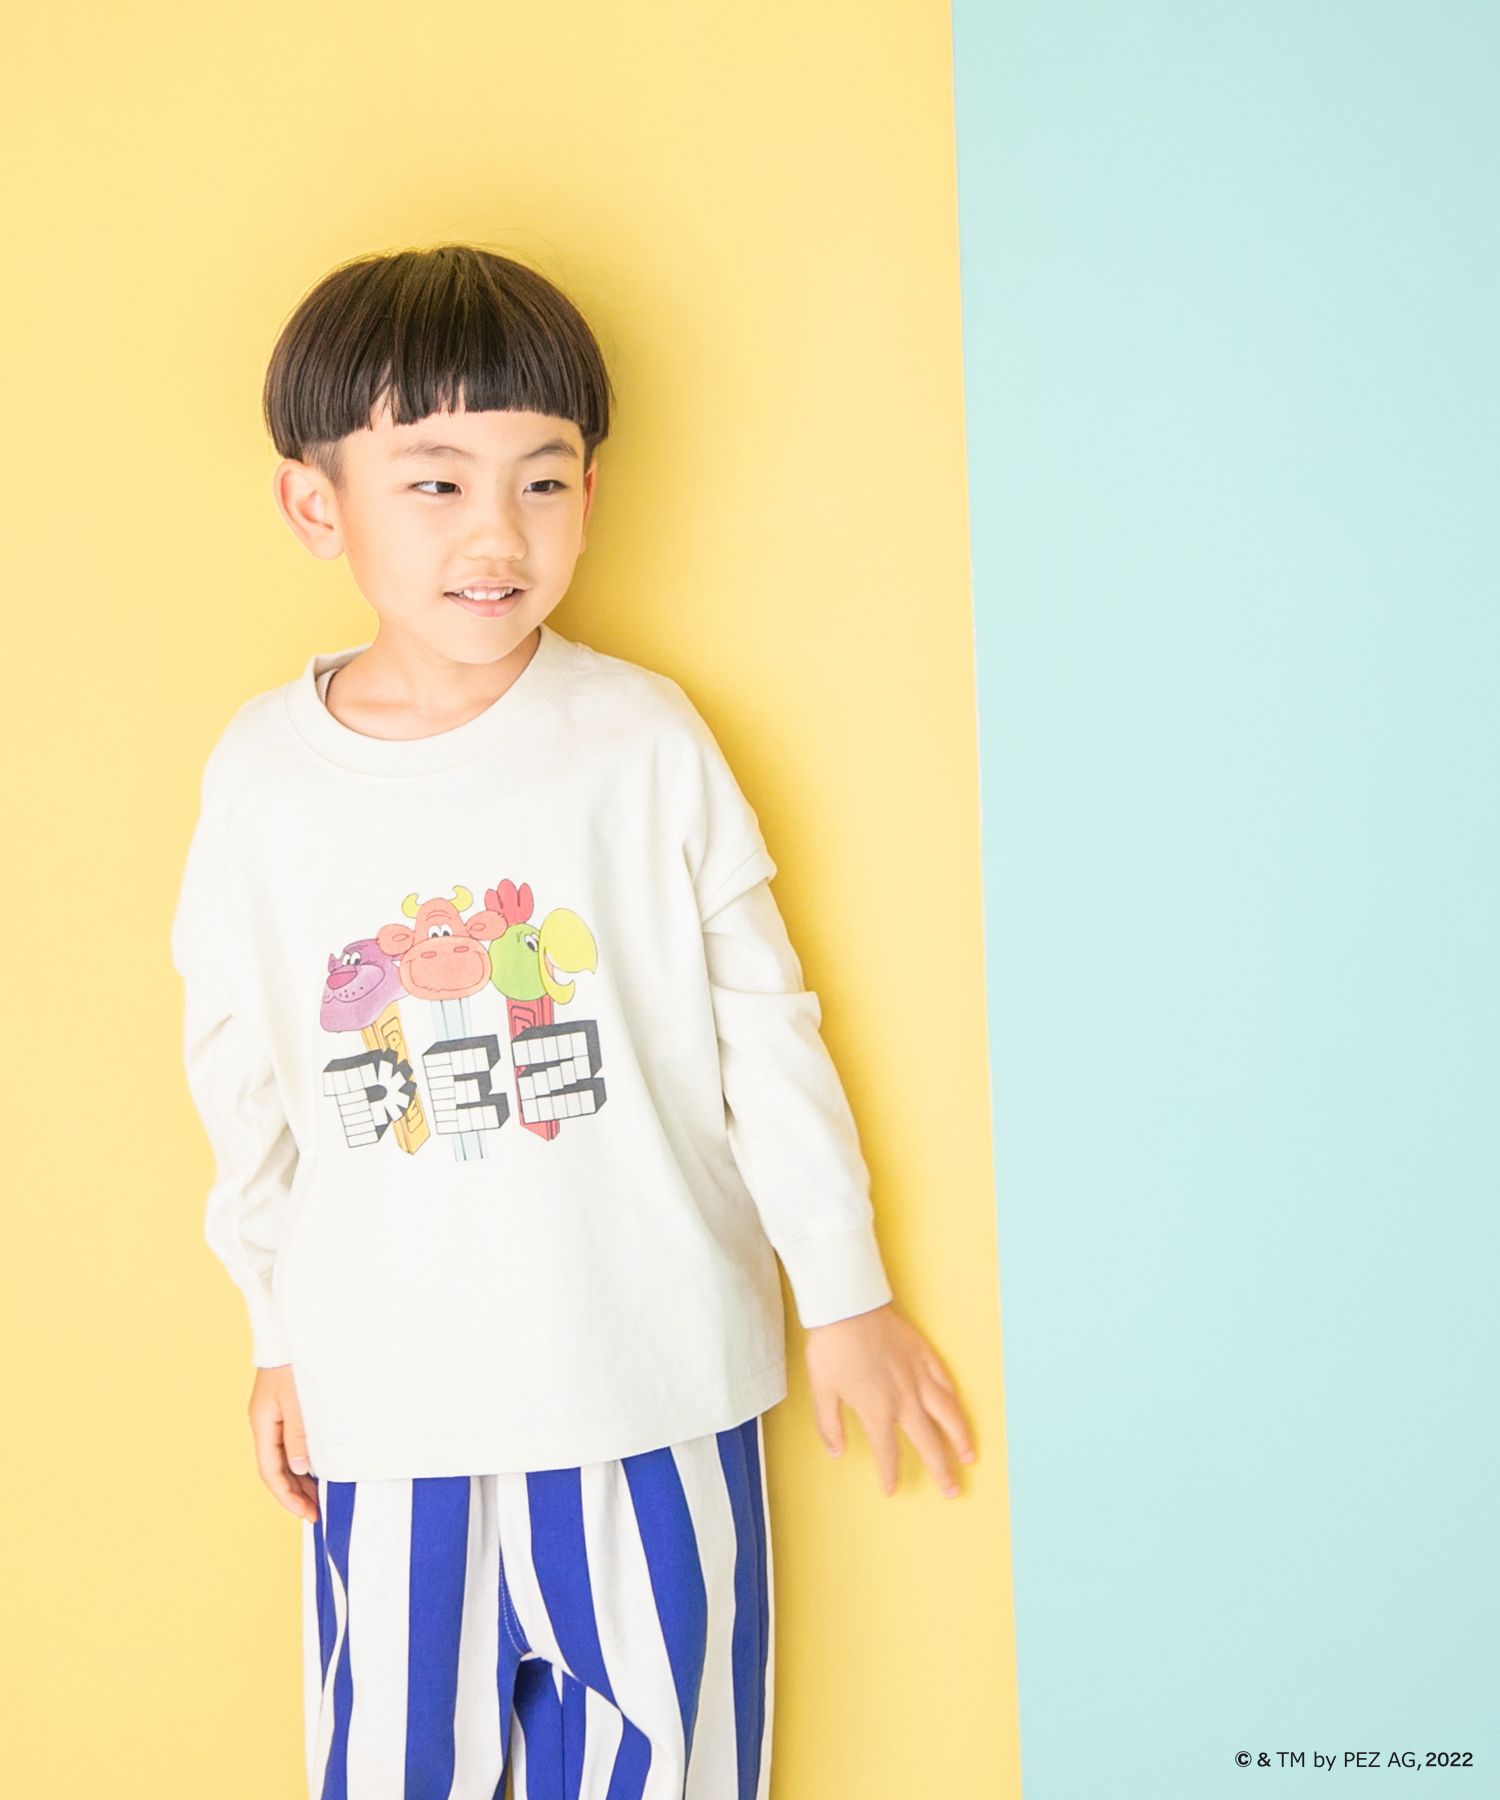 【KIDS】ＦＯＯＤキャラプリントＴシャツ | [公式]ローリーズ